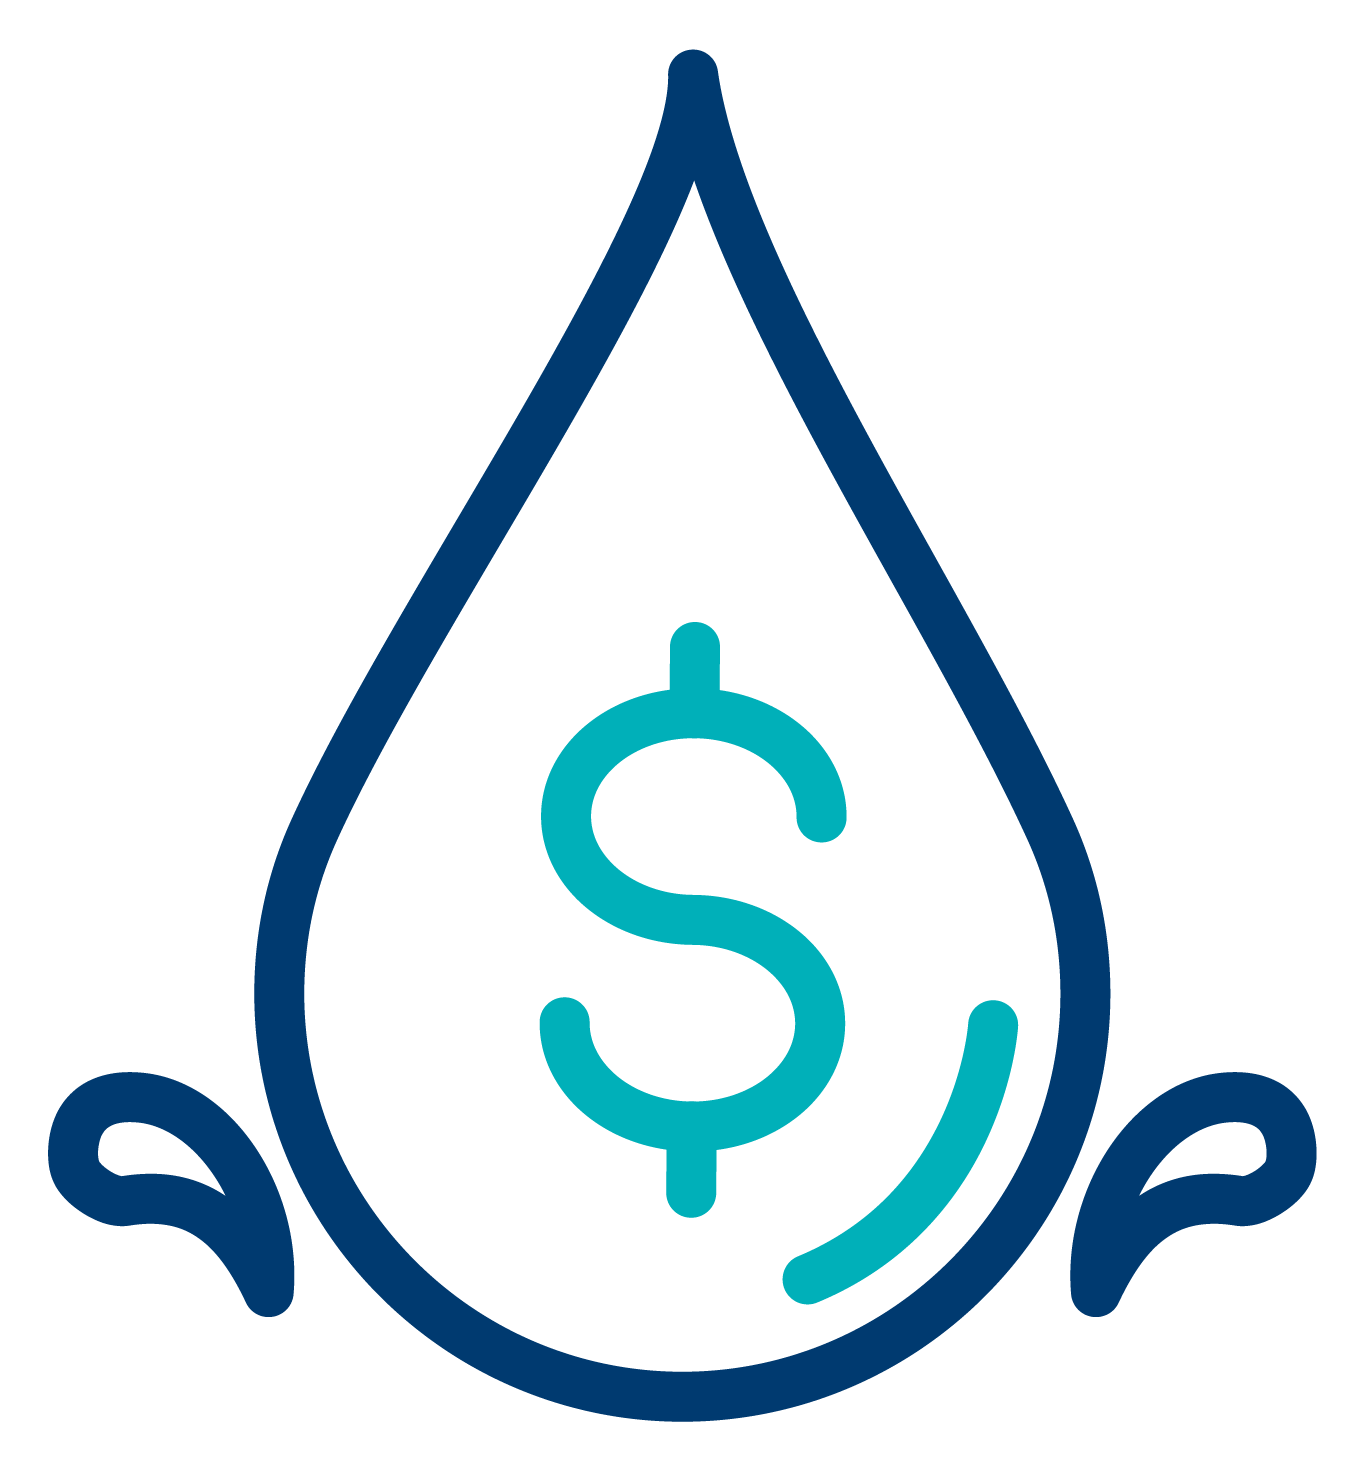 Drop of water with money symbol inside